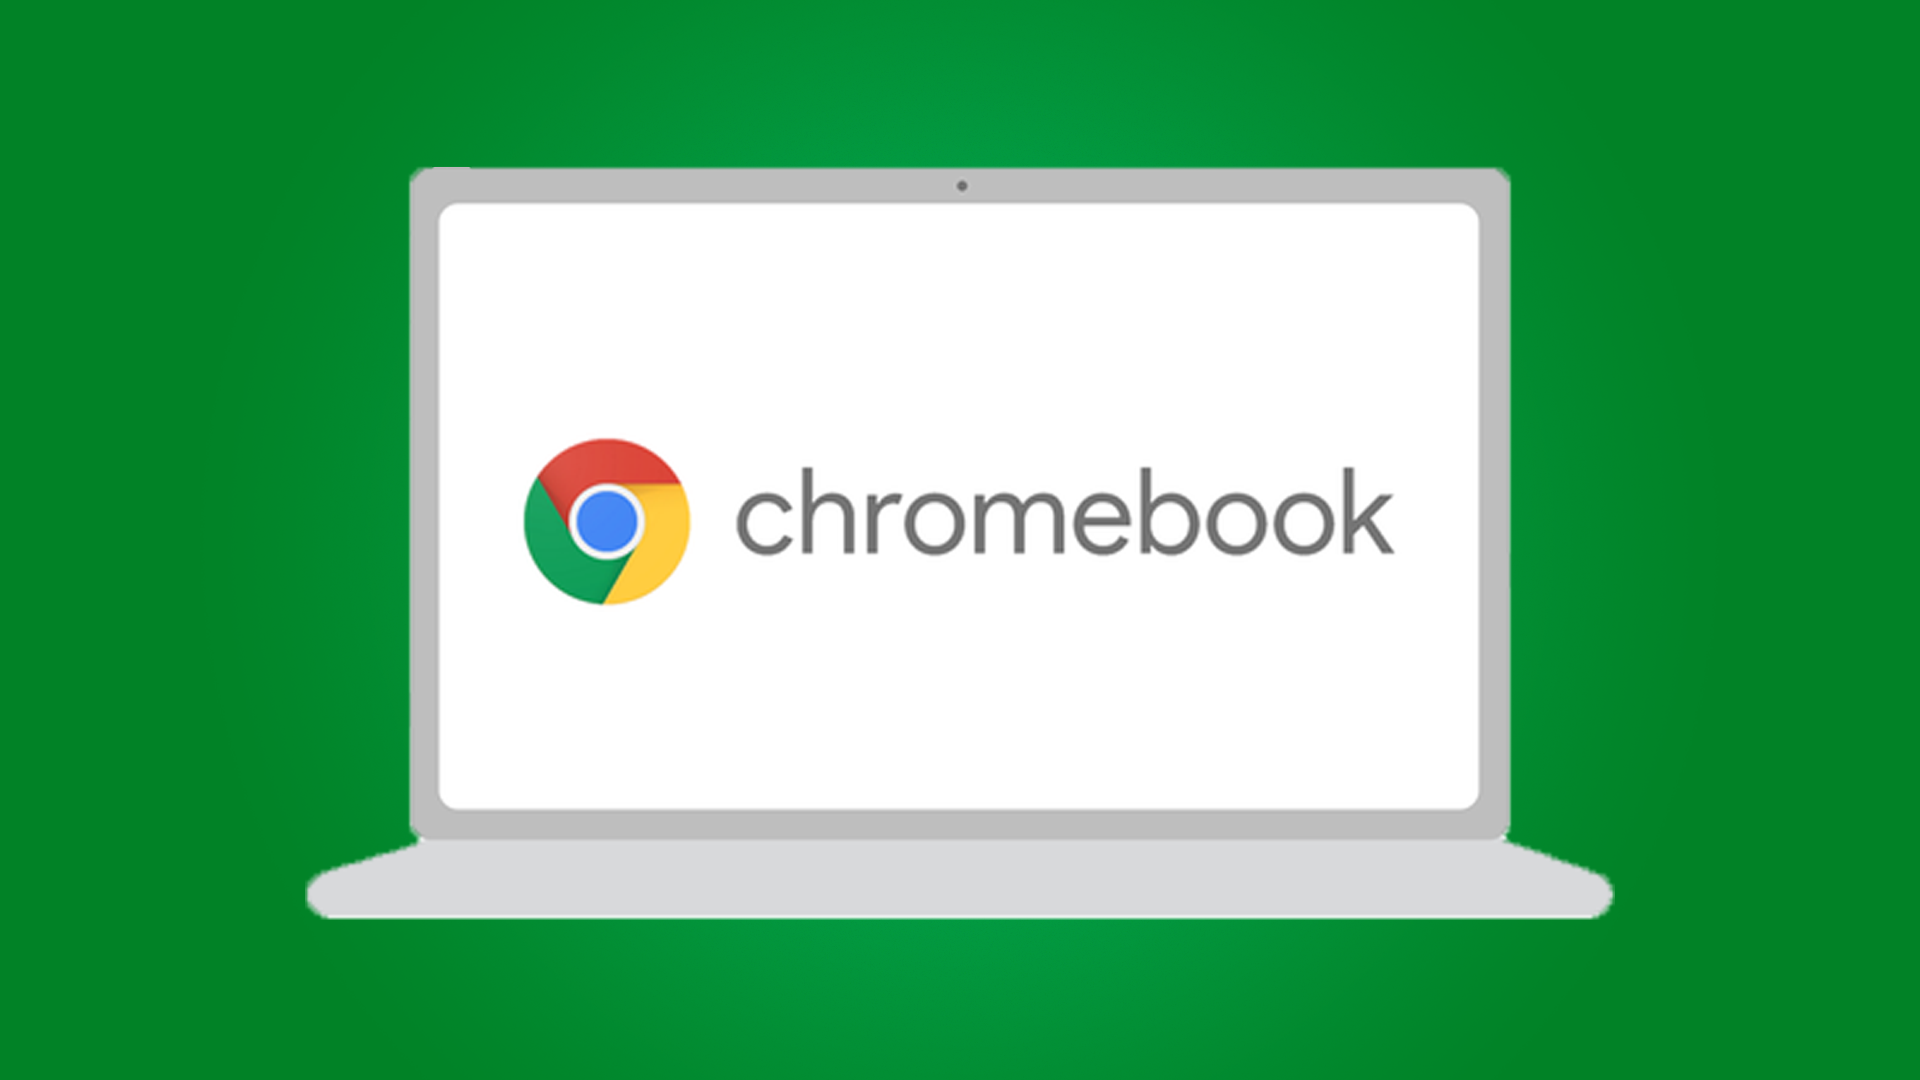 Google is finally making it easier to sync your Android and Chromebook devices